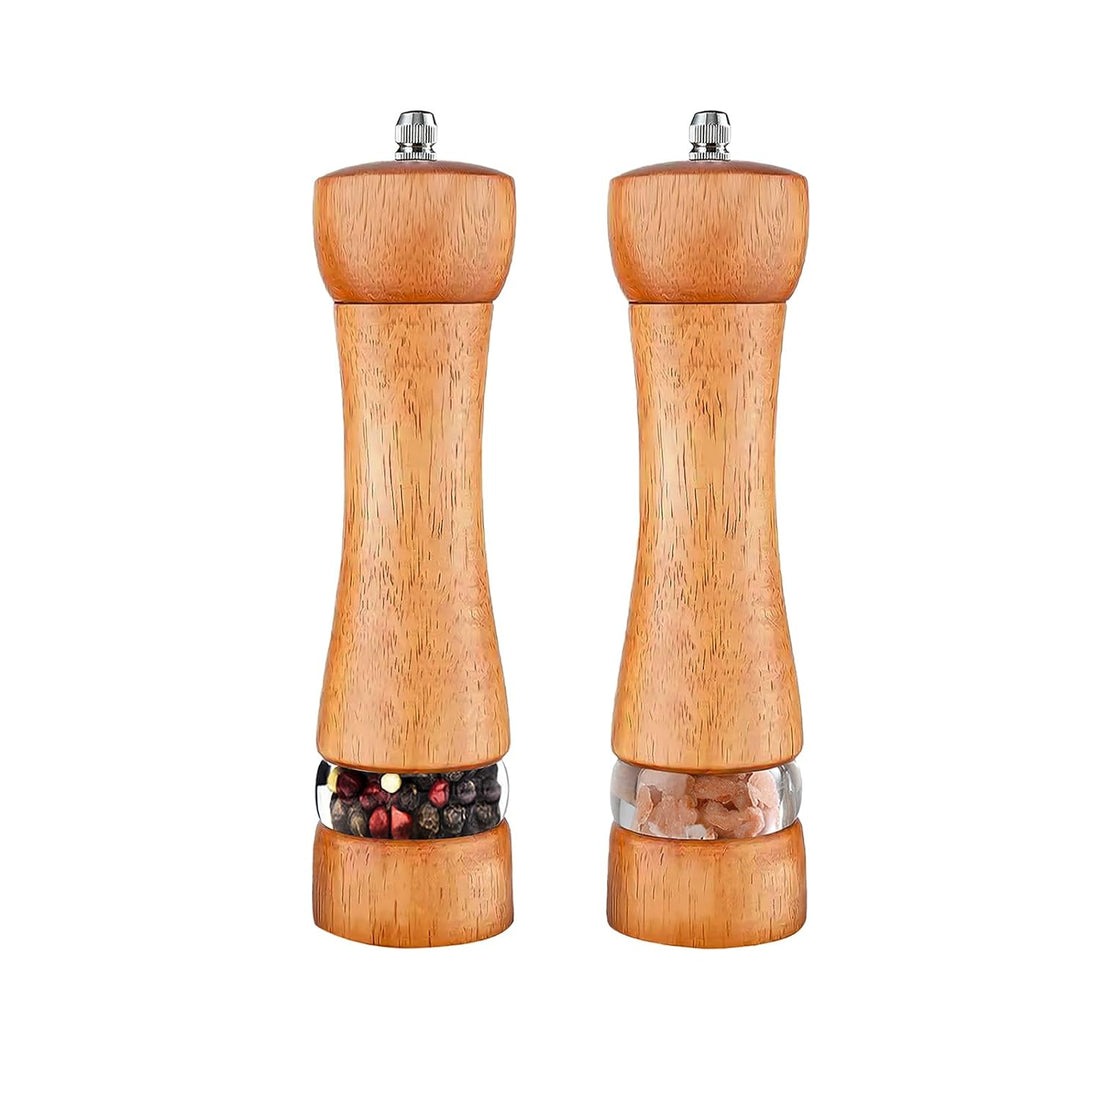 2-Piece Salt and Pepper Grinder Set, 8 Inch Tall Wooden Salt & Pepper Mill Sets with Adjustable Coarseness, Refillable Manual Pepper and Sea Salt Mills for Home Cooks